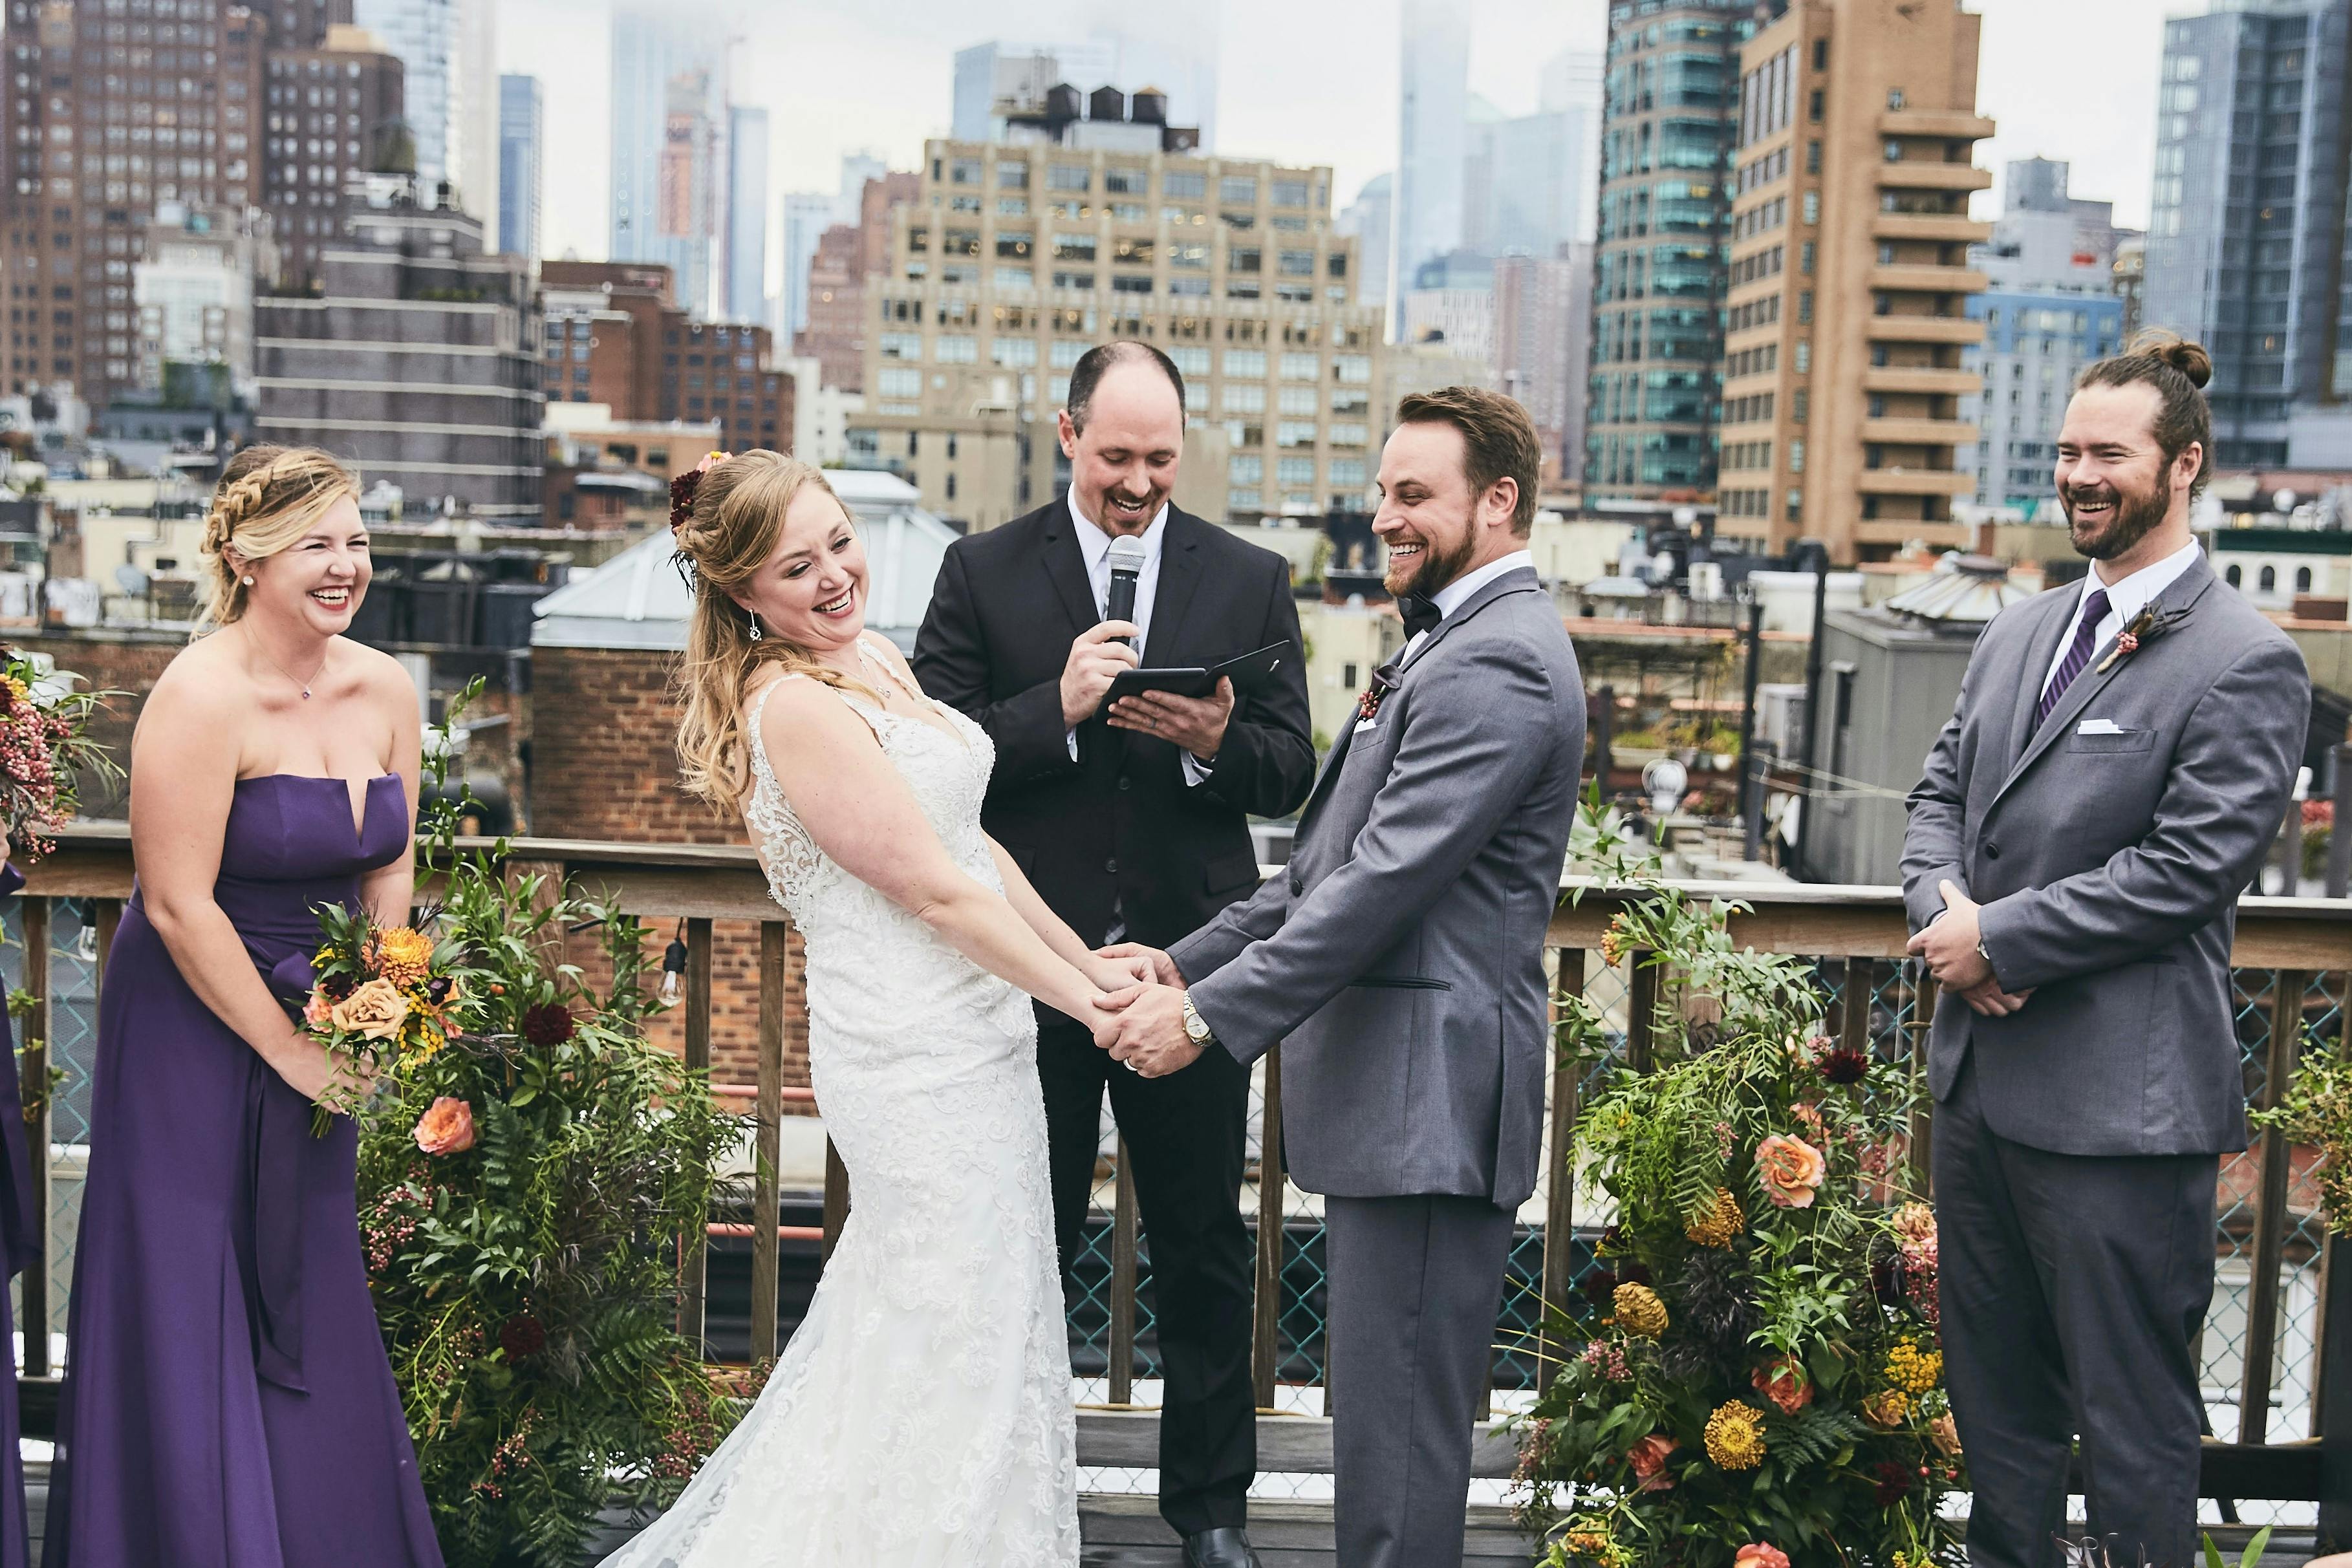 Soho Rooftop Wedding with City Backdrop for Arch | PartySlate